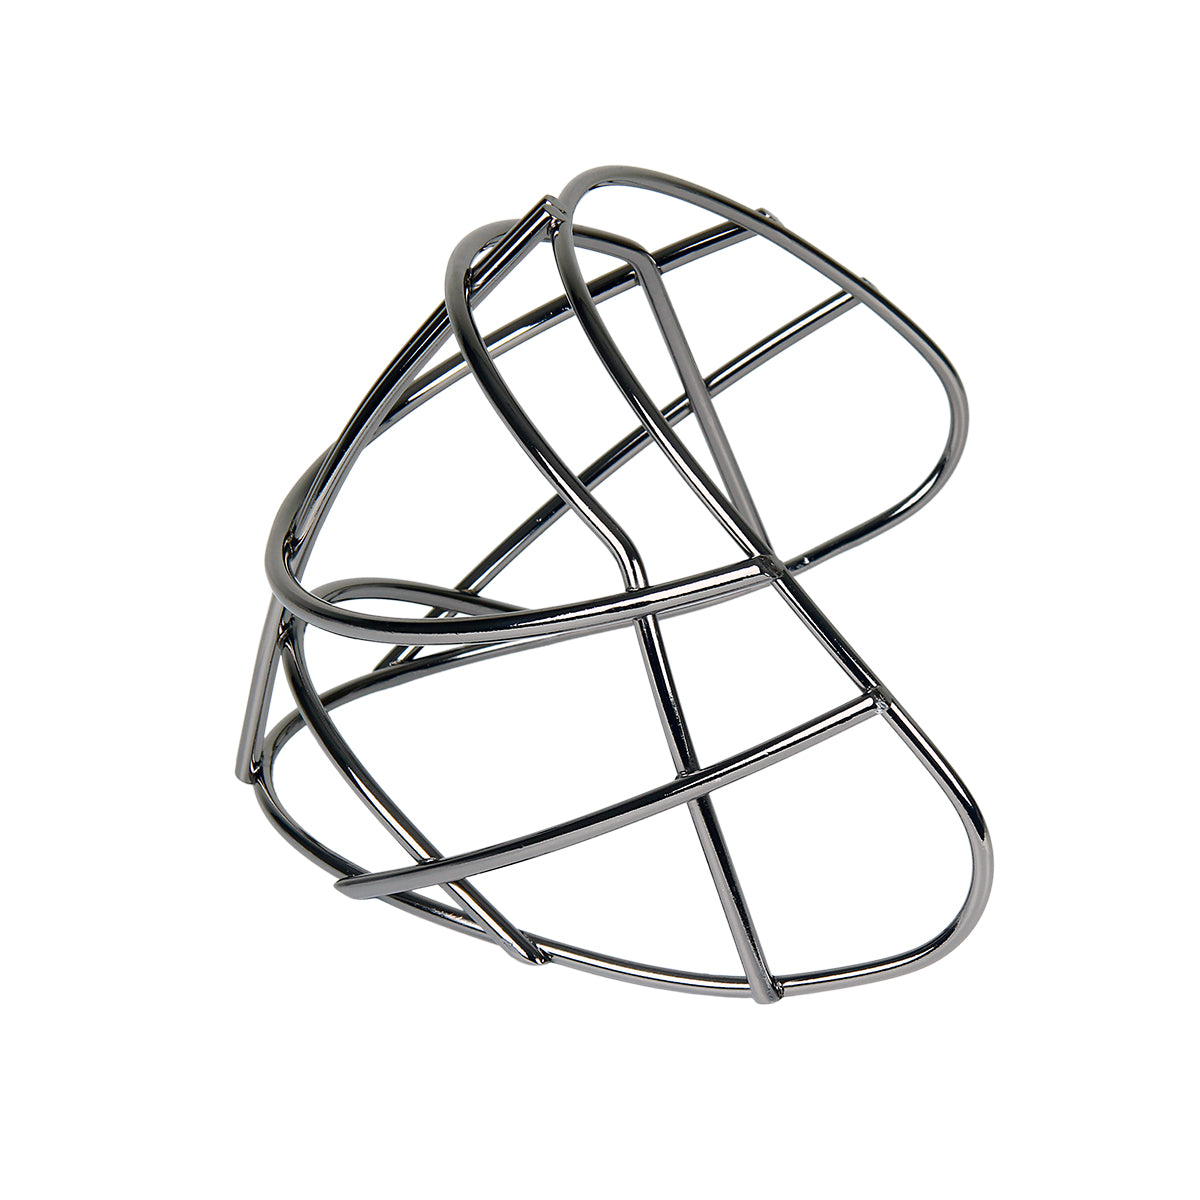 Helmet Grill/Cage - ABS